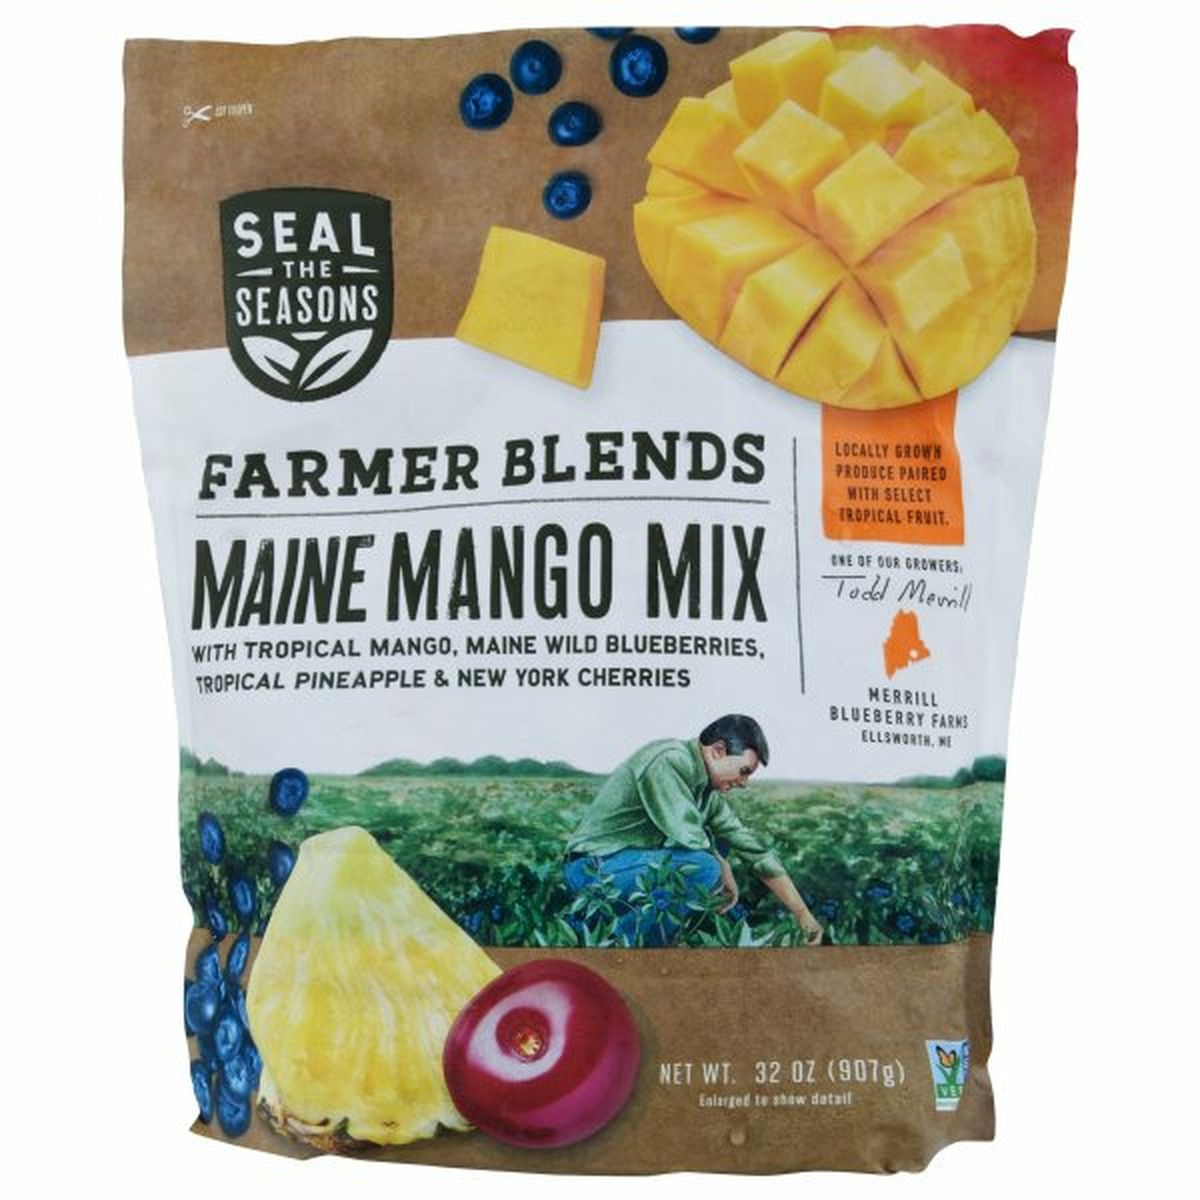 Calories in Seal The Seasons Farmer Blends Maine Mango Mix